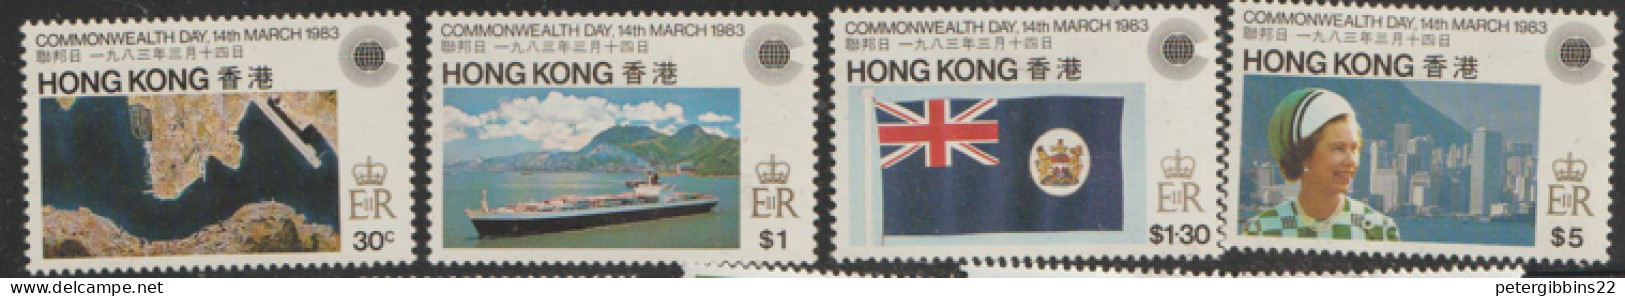 Hong Kong  1983  VSG 438-41  Commonwealth   Day  Mounted Mint - Unused Stamps